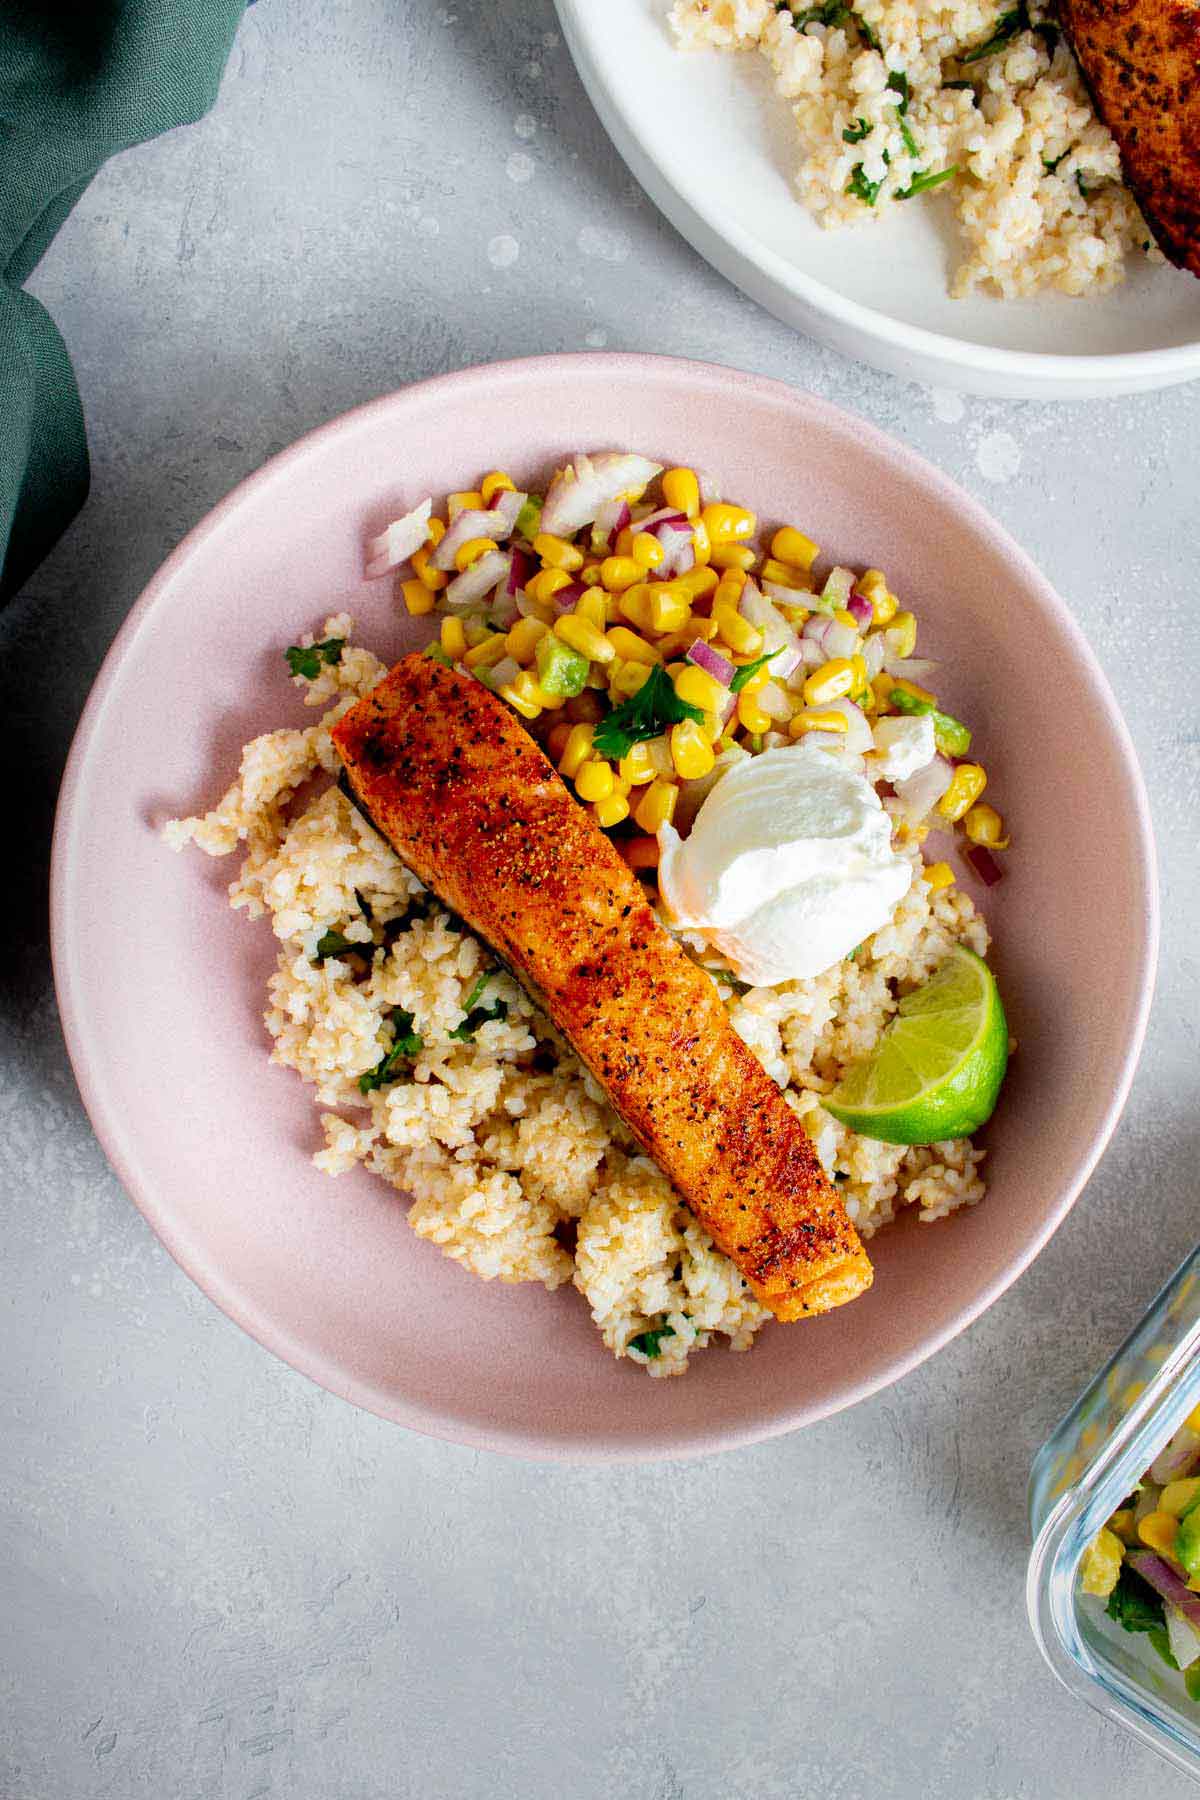 Overhead view of a plate of air fryer salmon on top of brown rice, corn salsa, and sour cream.